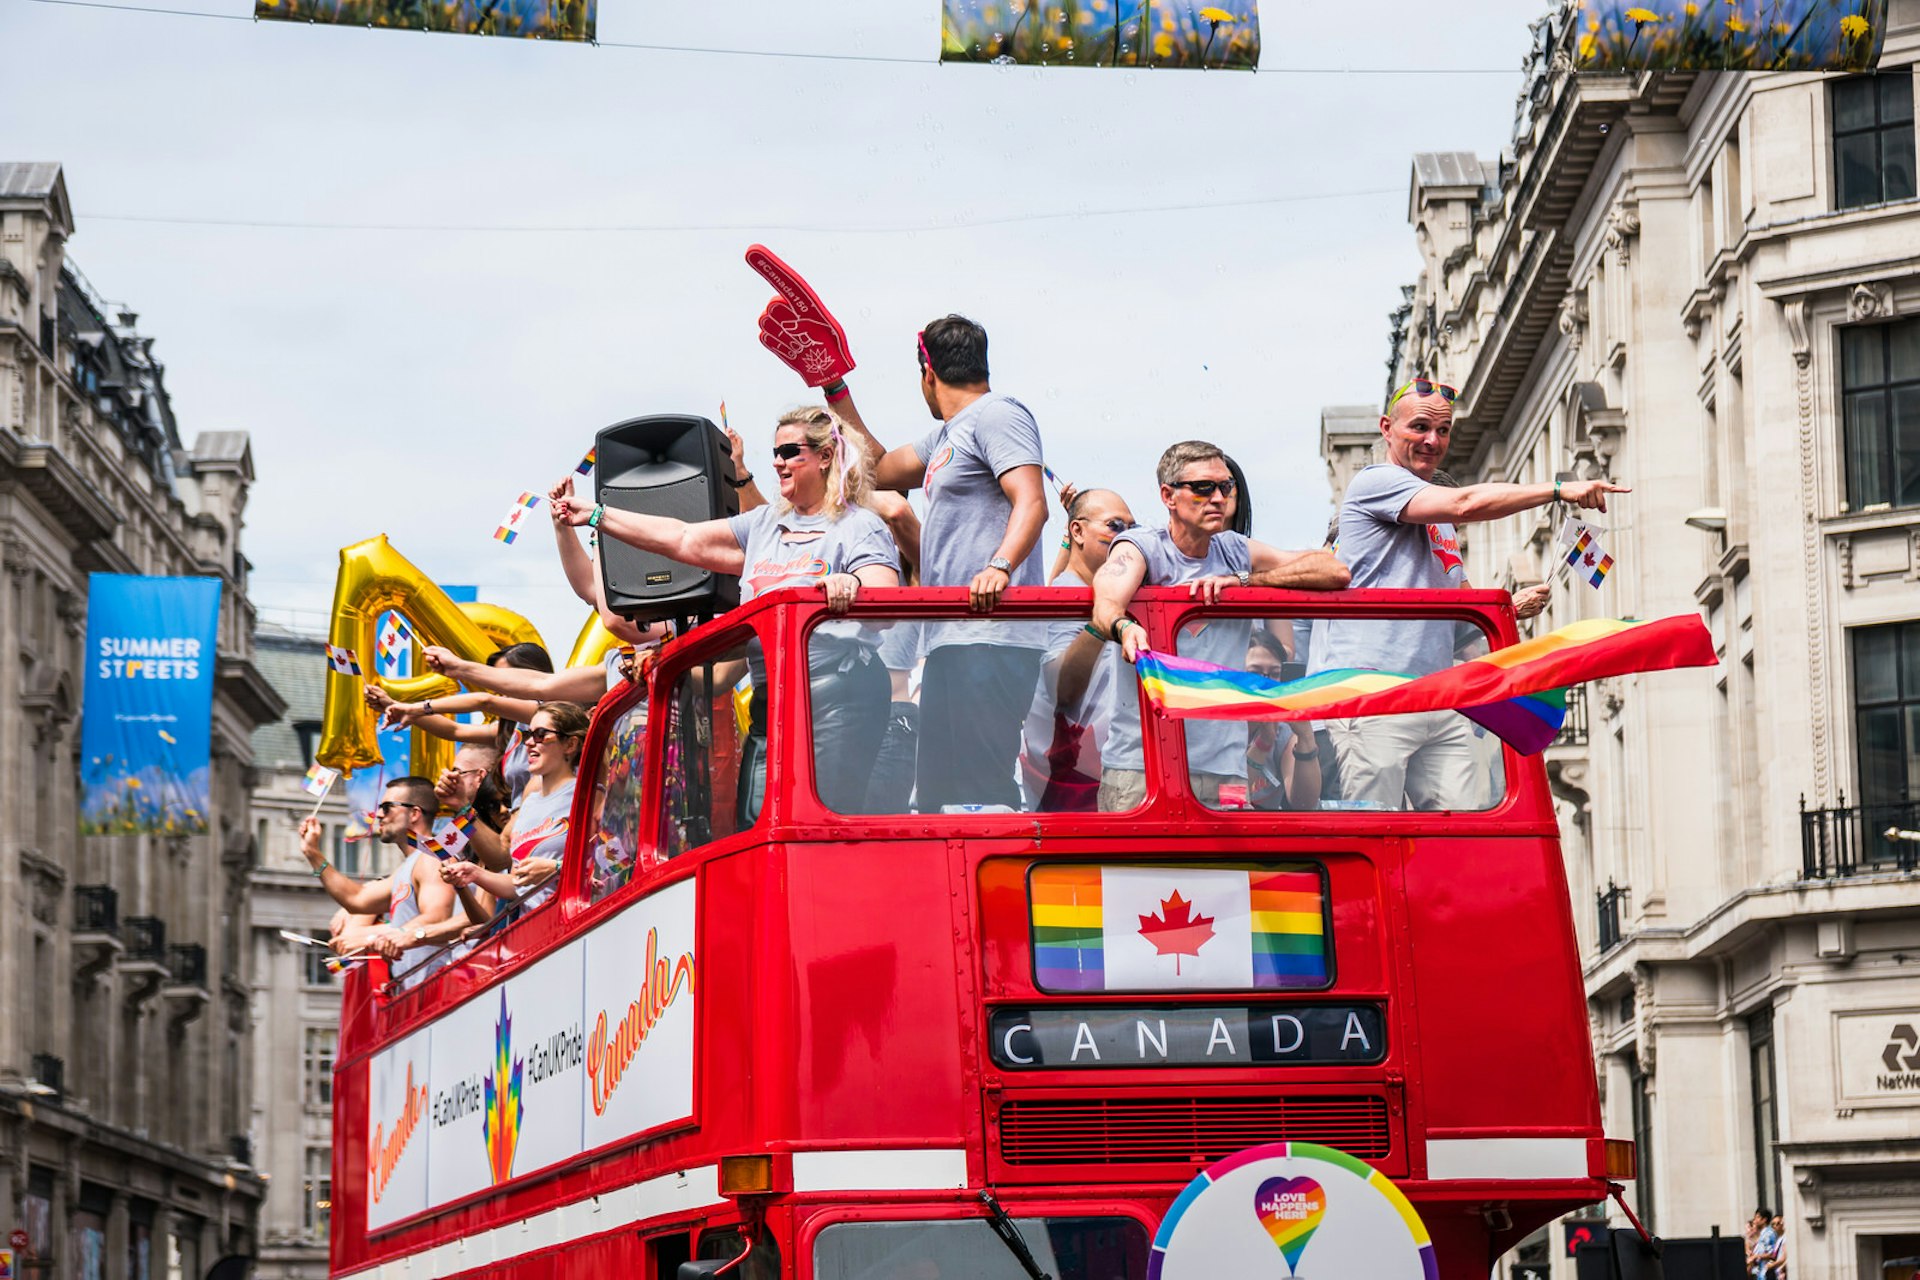 Pride in Europe: An iconic red double-decker bus drives the route of London Pride © Kalamurzing / Shutterstock